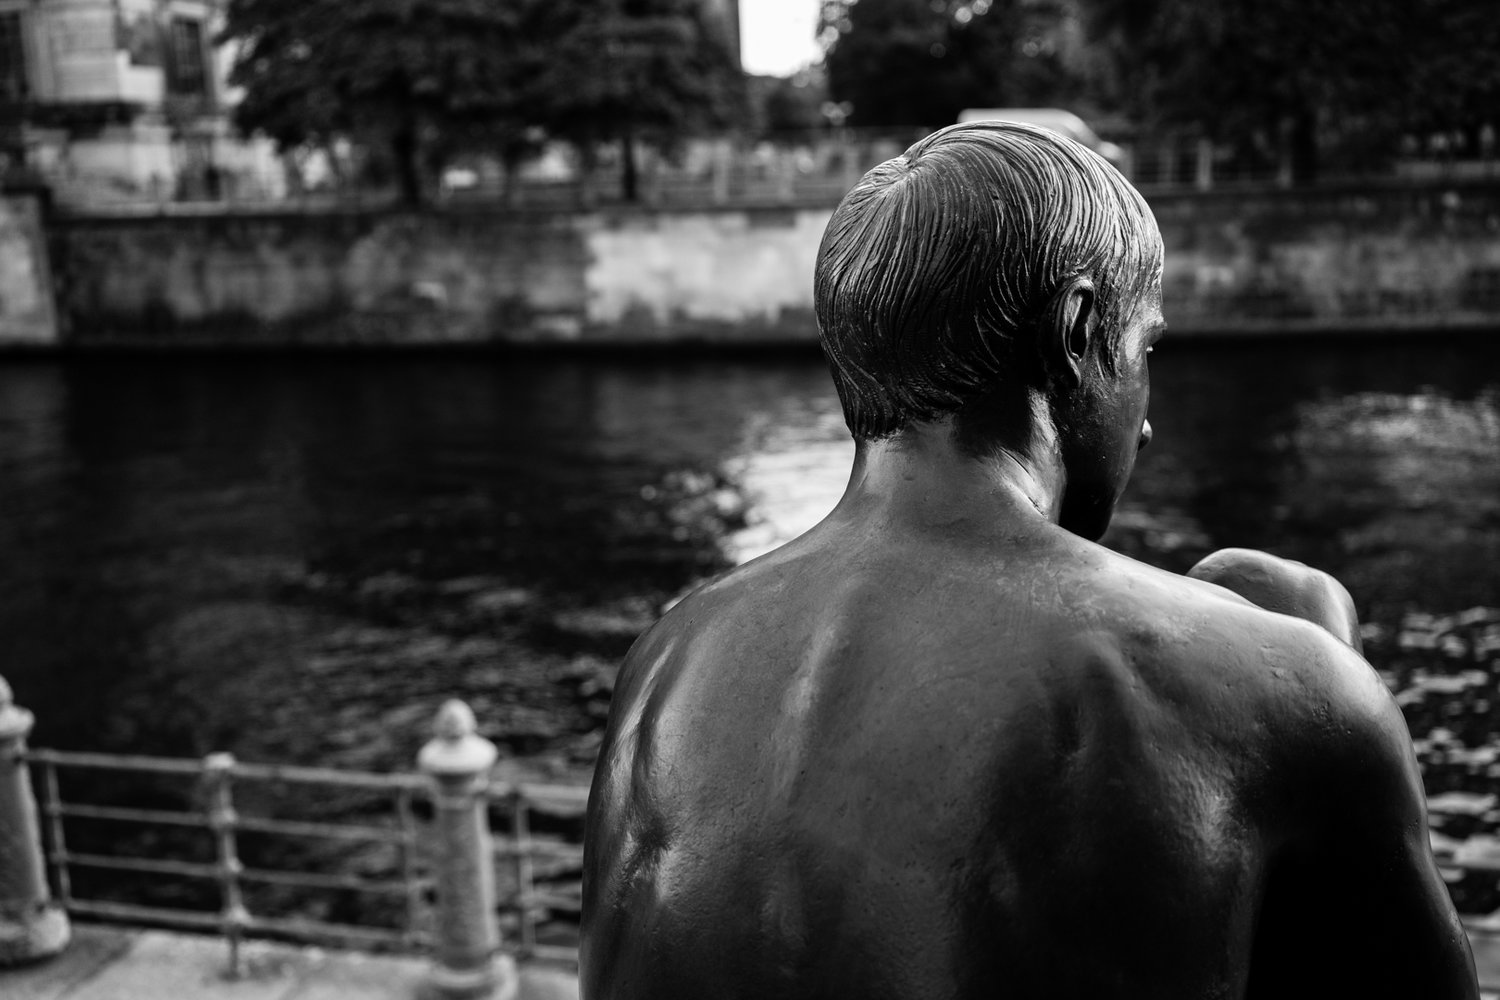 spree river berlin - statue of man by waterfront